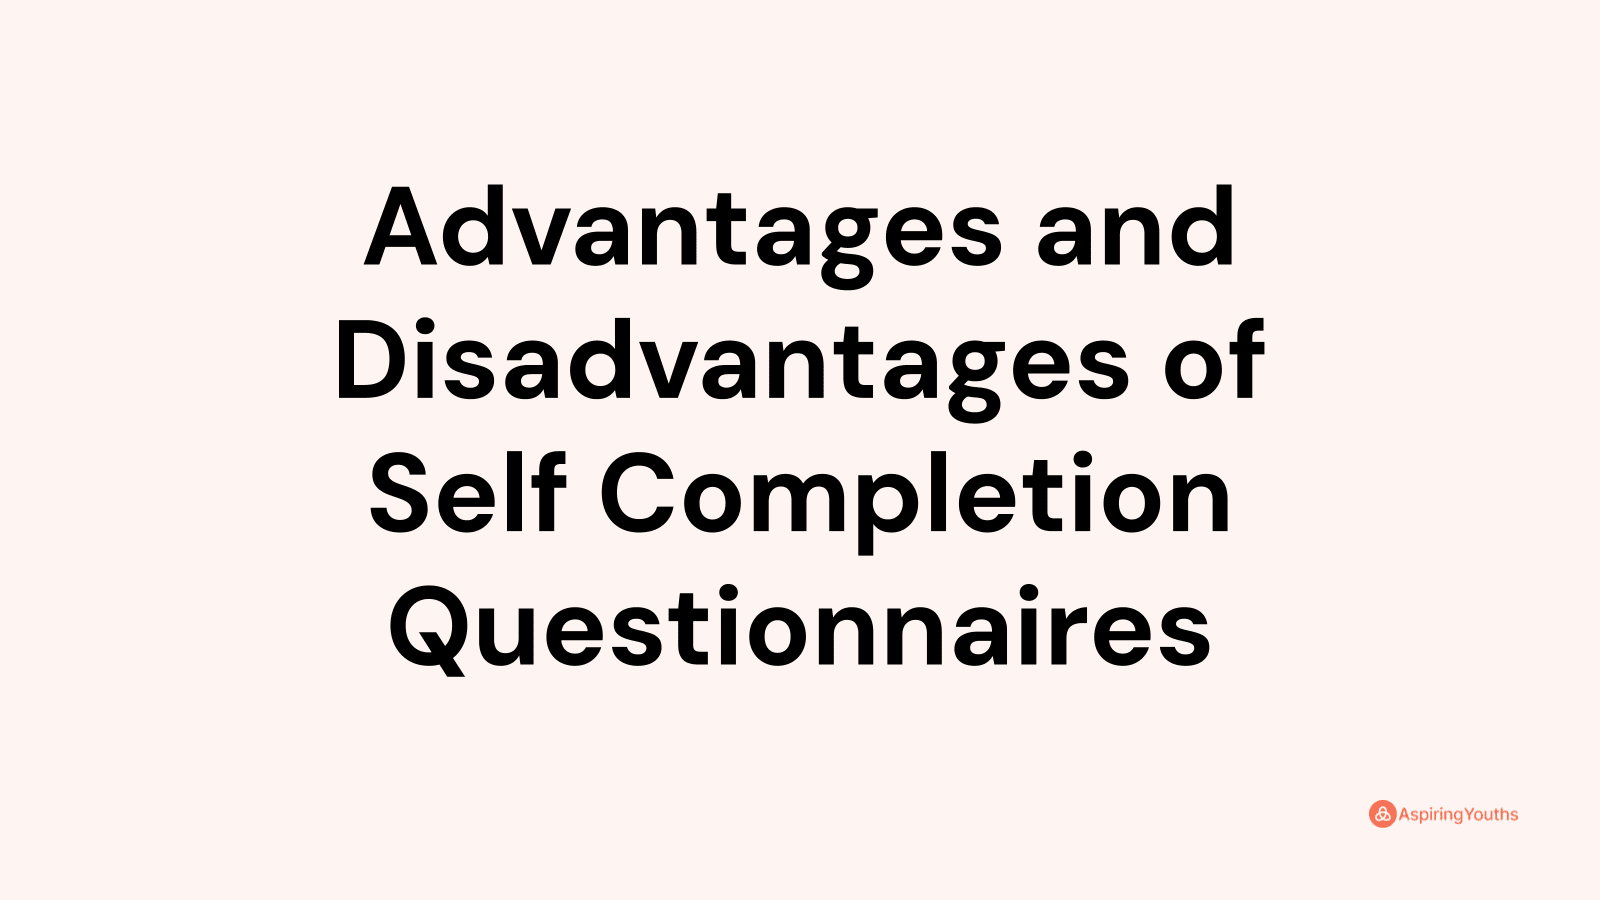 Advantages and disadvantages of Self Completion Questionnaires